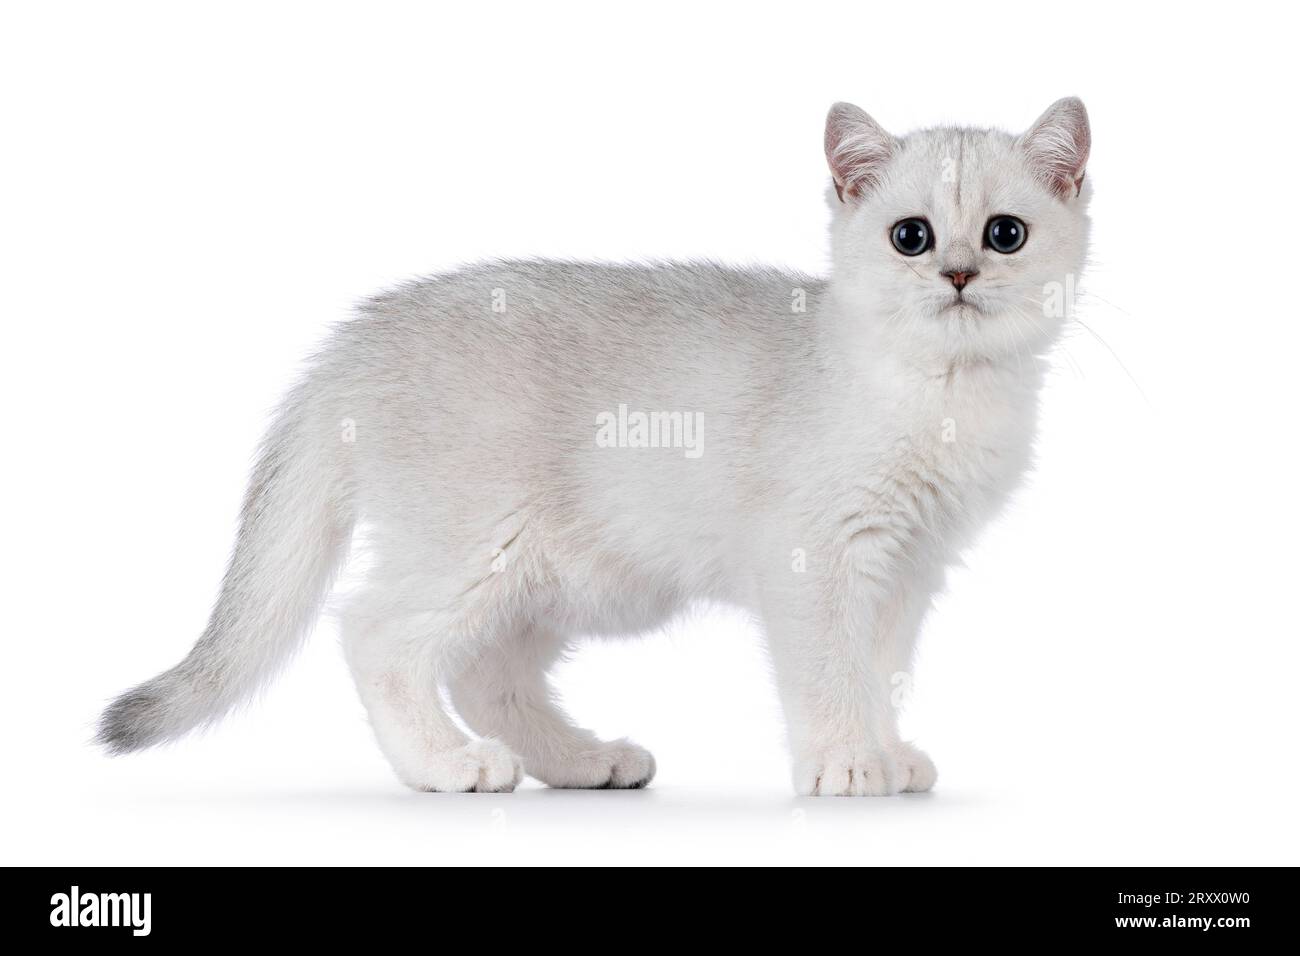 Adorable silver shaded British Shorthair cat kitten, standing side ways. Looking towards camera. Isolated on a white background. Stock Photo